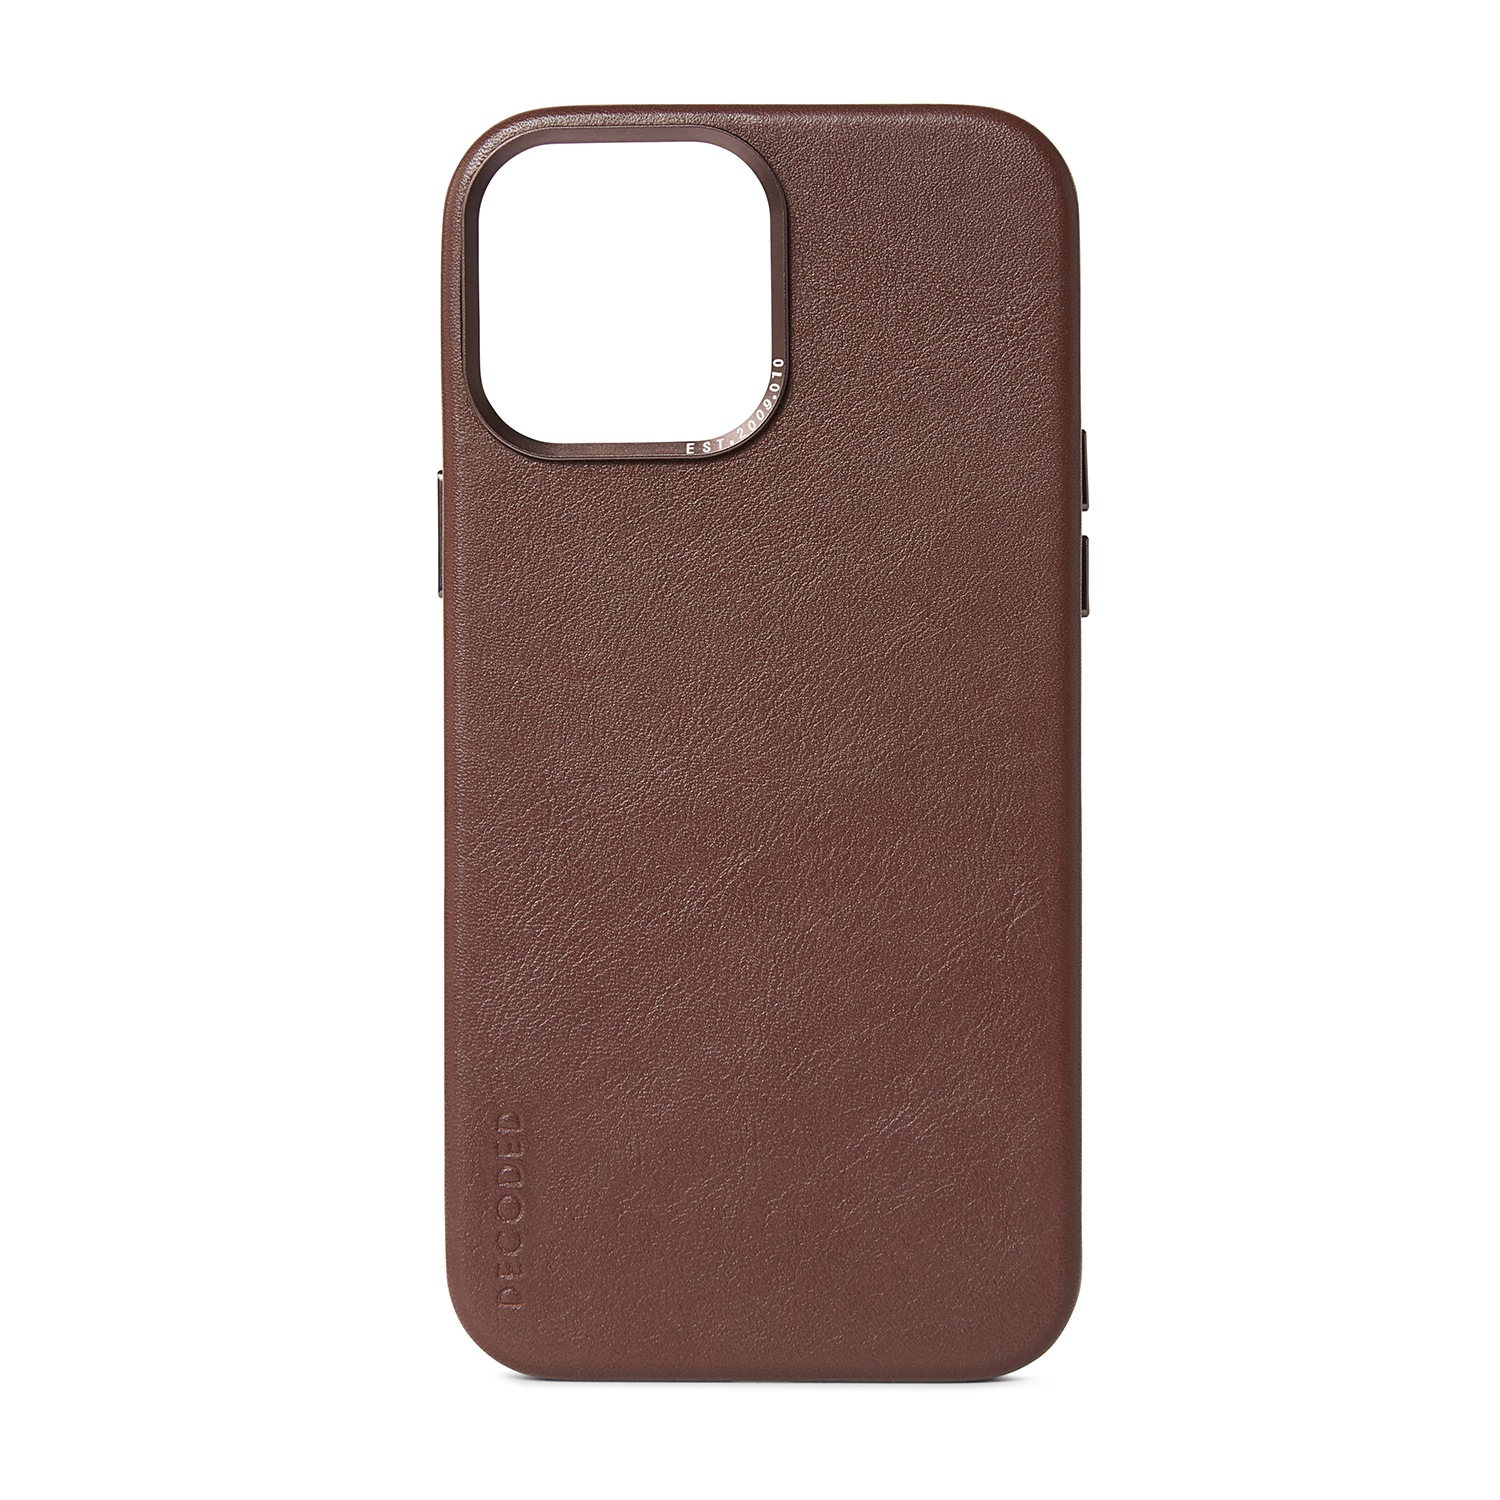 Smartphone-Hülle »Decoded Leather Backcover iPhone 13 Pro Max«, iPhone 13 Pro Max